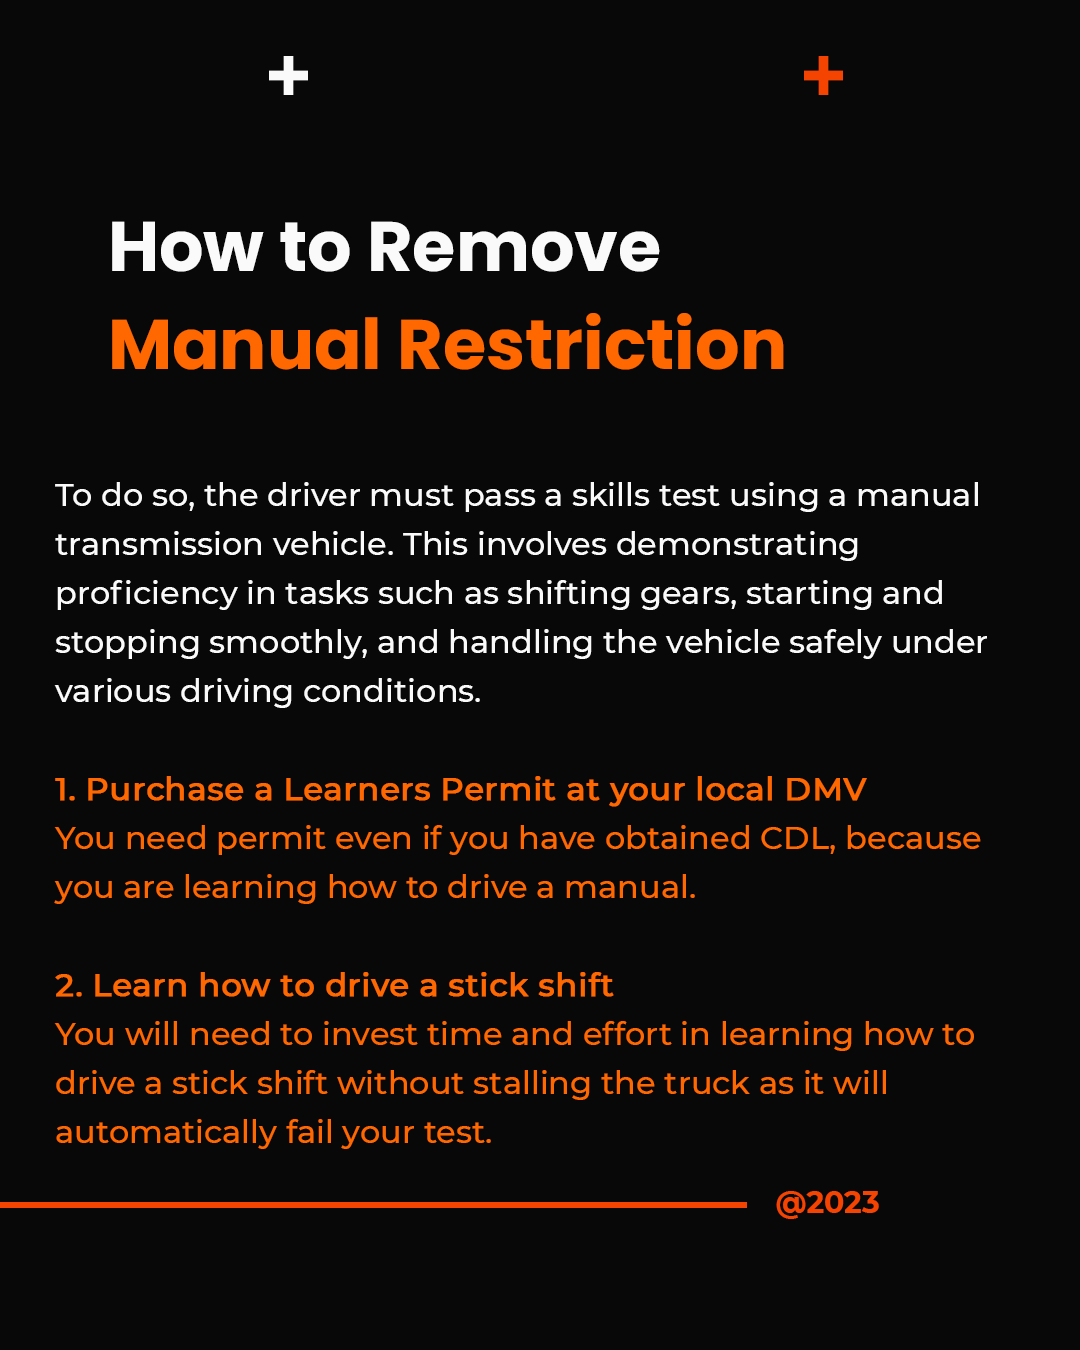 E Restriction Manual Definition Trucking - Truckers Wiki Carousel 3